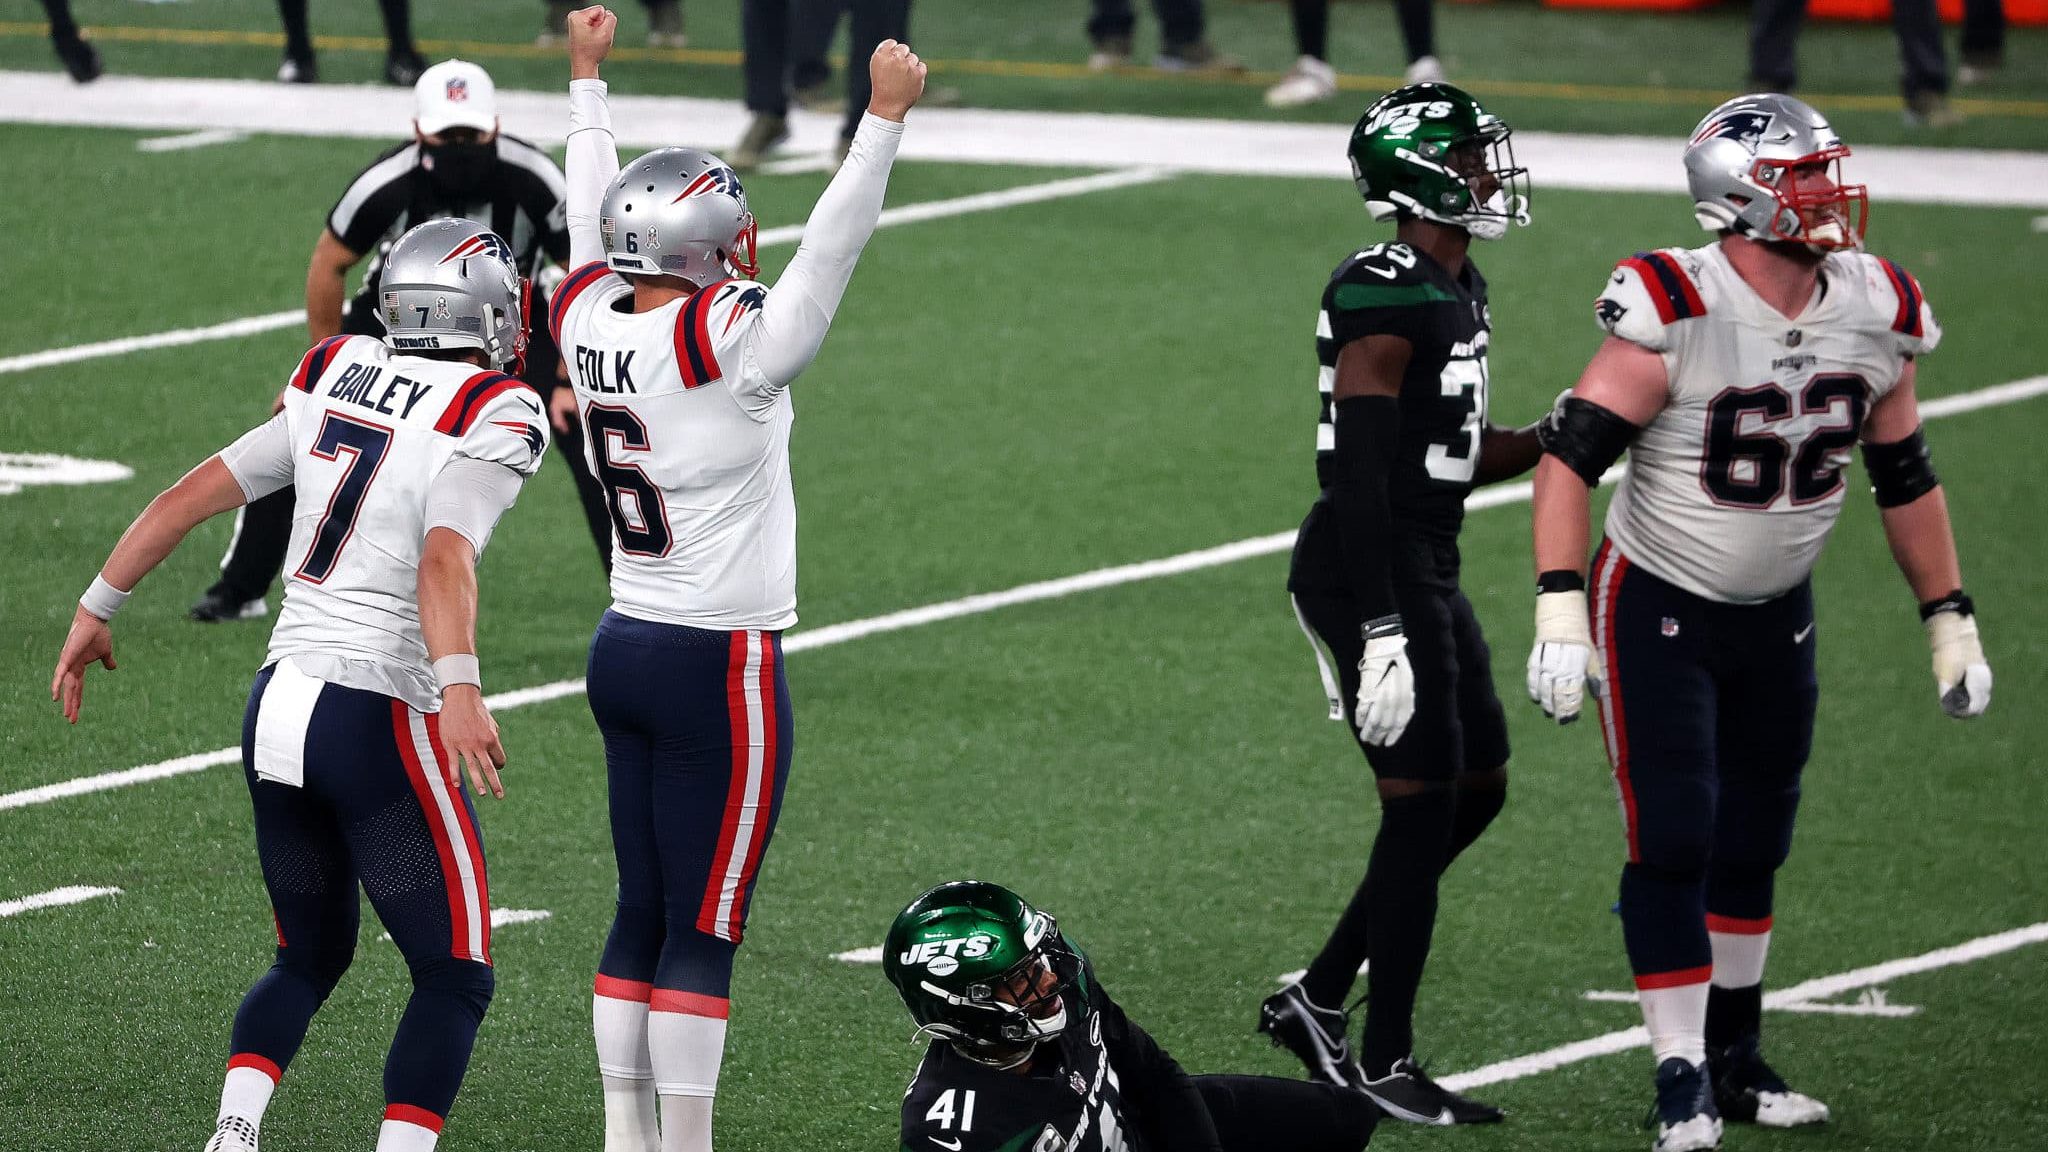 EAST RUTHERFORD, NJ - NOVEMBER 9: New England Patriots kicker Nick Folk (6) turned towards his old team and raises his arms in triumph after kicking the game winning field goal to beat the New York Jets 30-27 with seconds left in the fourth quarter. The New York Jets host the New England Patriots in a Monday Night Football game at MetLife stadium in East Rutherford, NJ on Nov. 9, 2020.